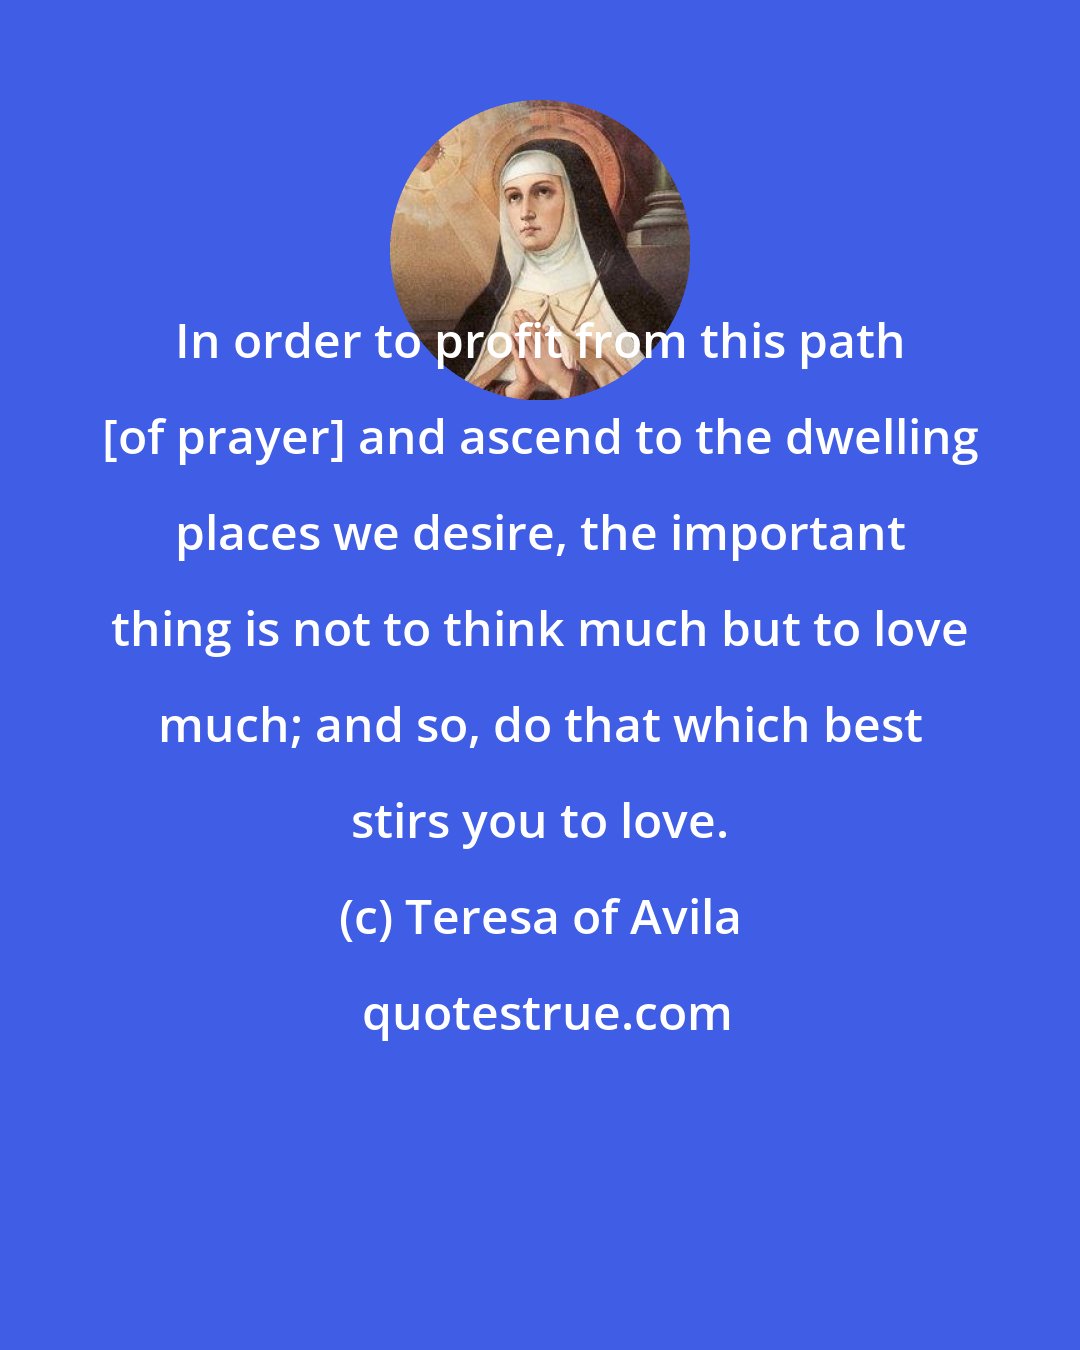 Teresa of Avila: In order to profit from this path [of prayer] and ascend to the dwelling places we desire, the important thing is not to think much but to love much; and so, do that which best stirs you to love.